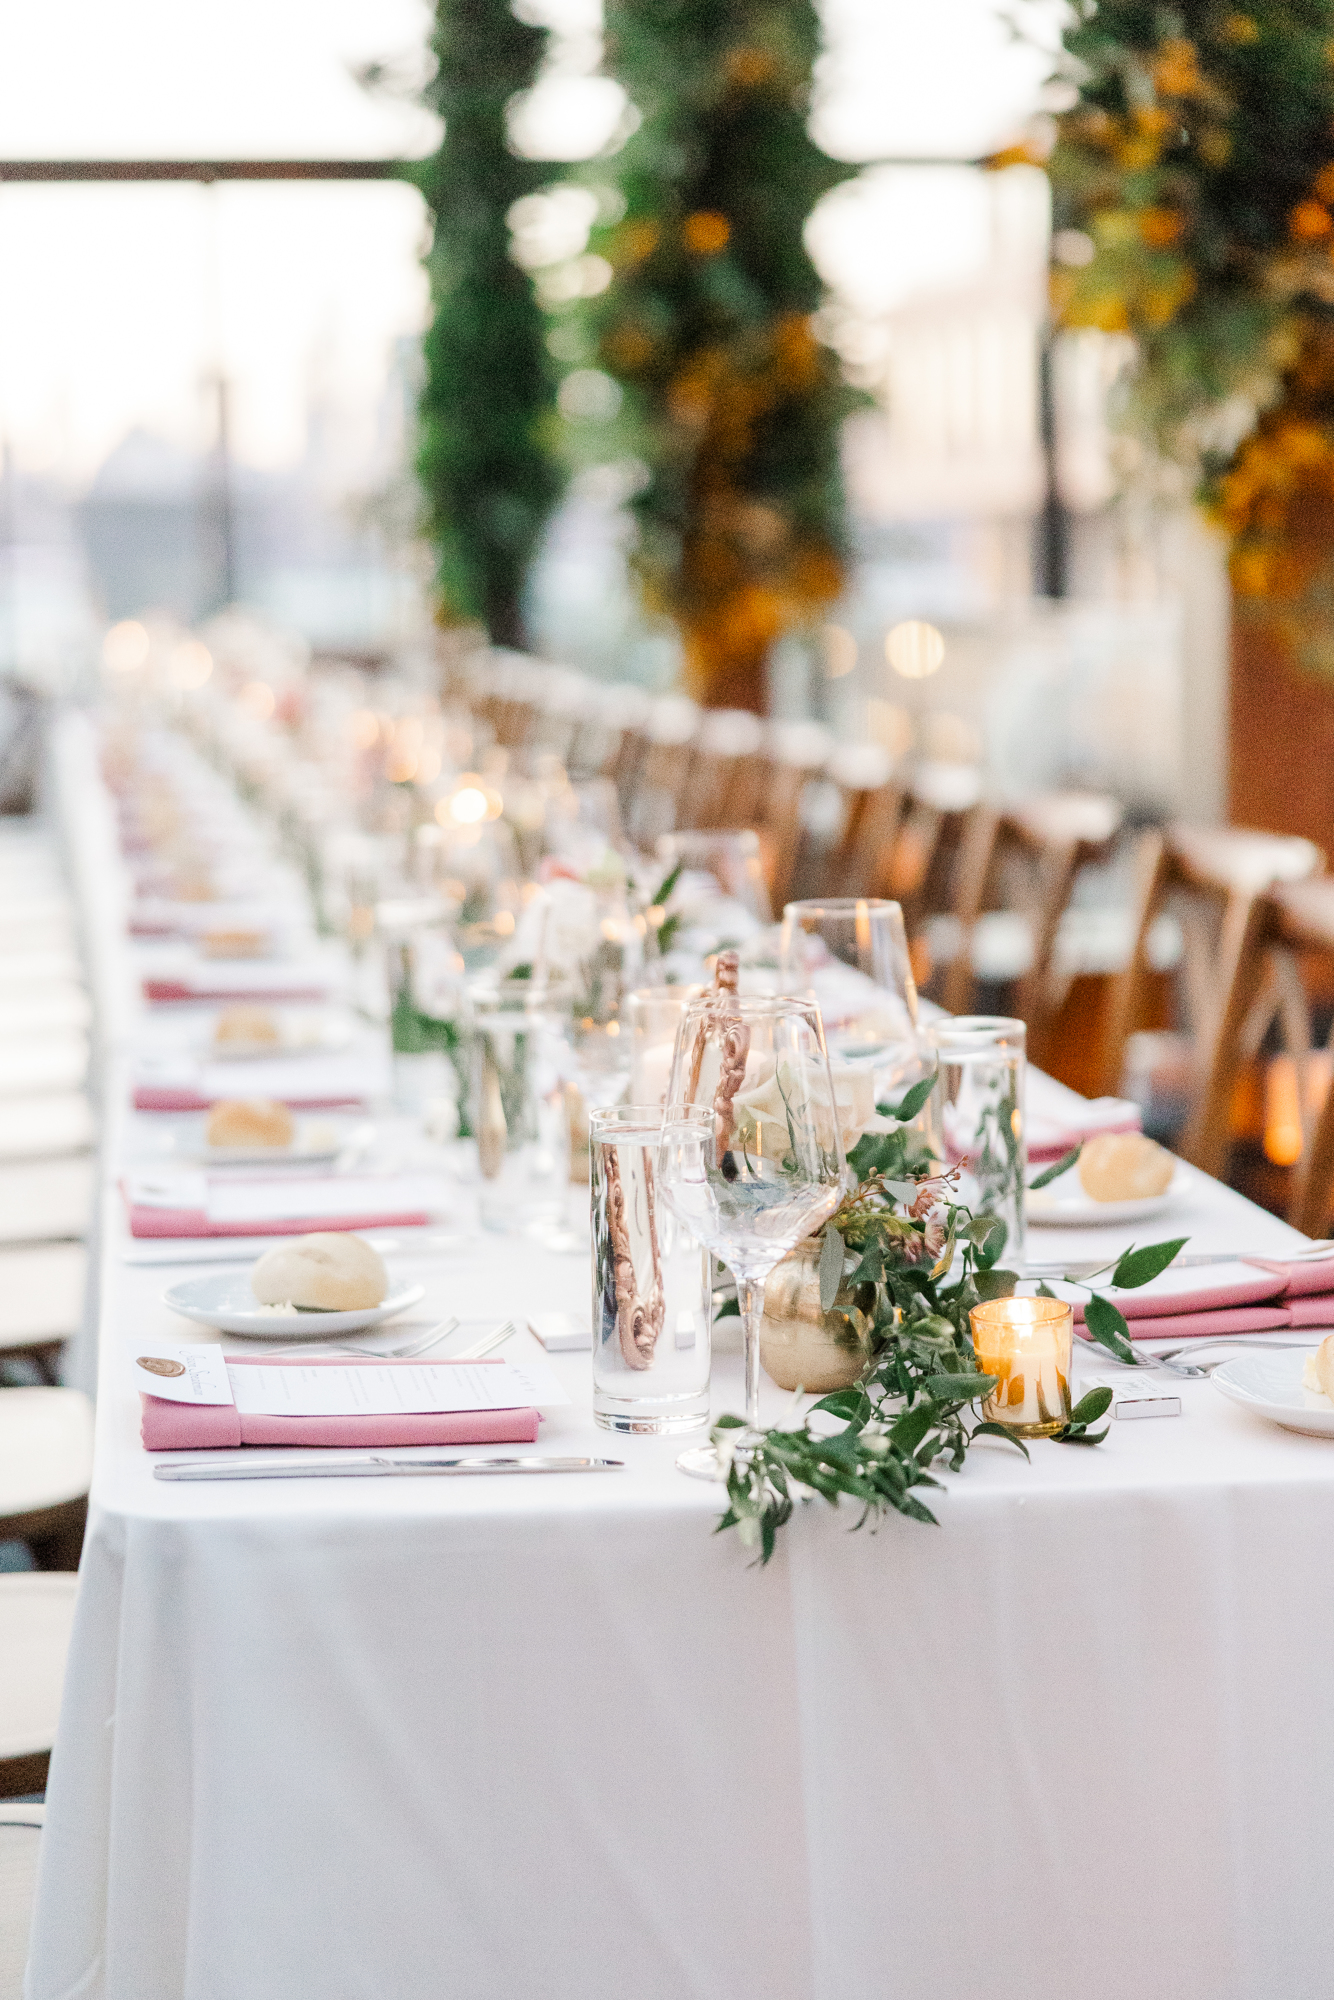 Spectacular 74Wythe Wedding Photography in Wintery Brooklyn with Rooftop Views